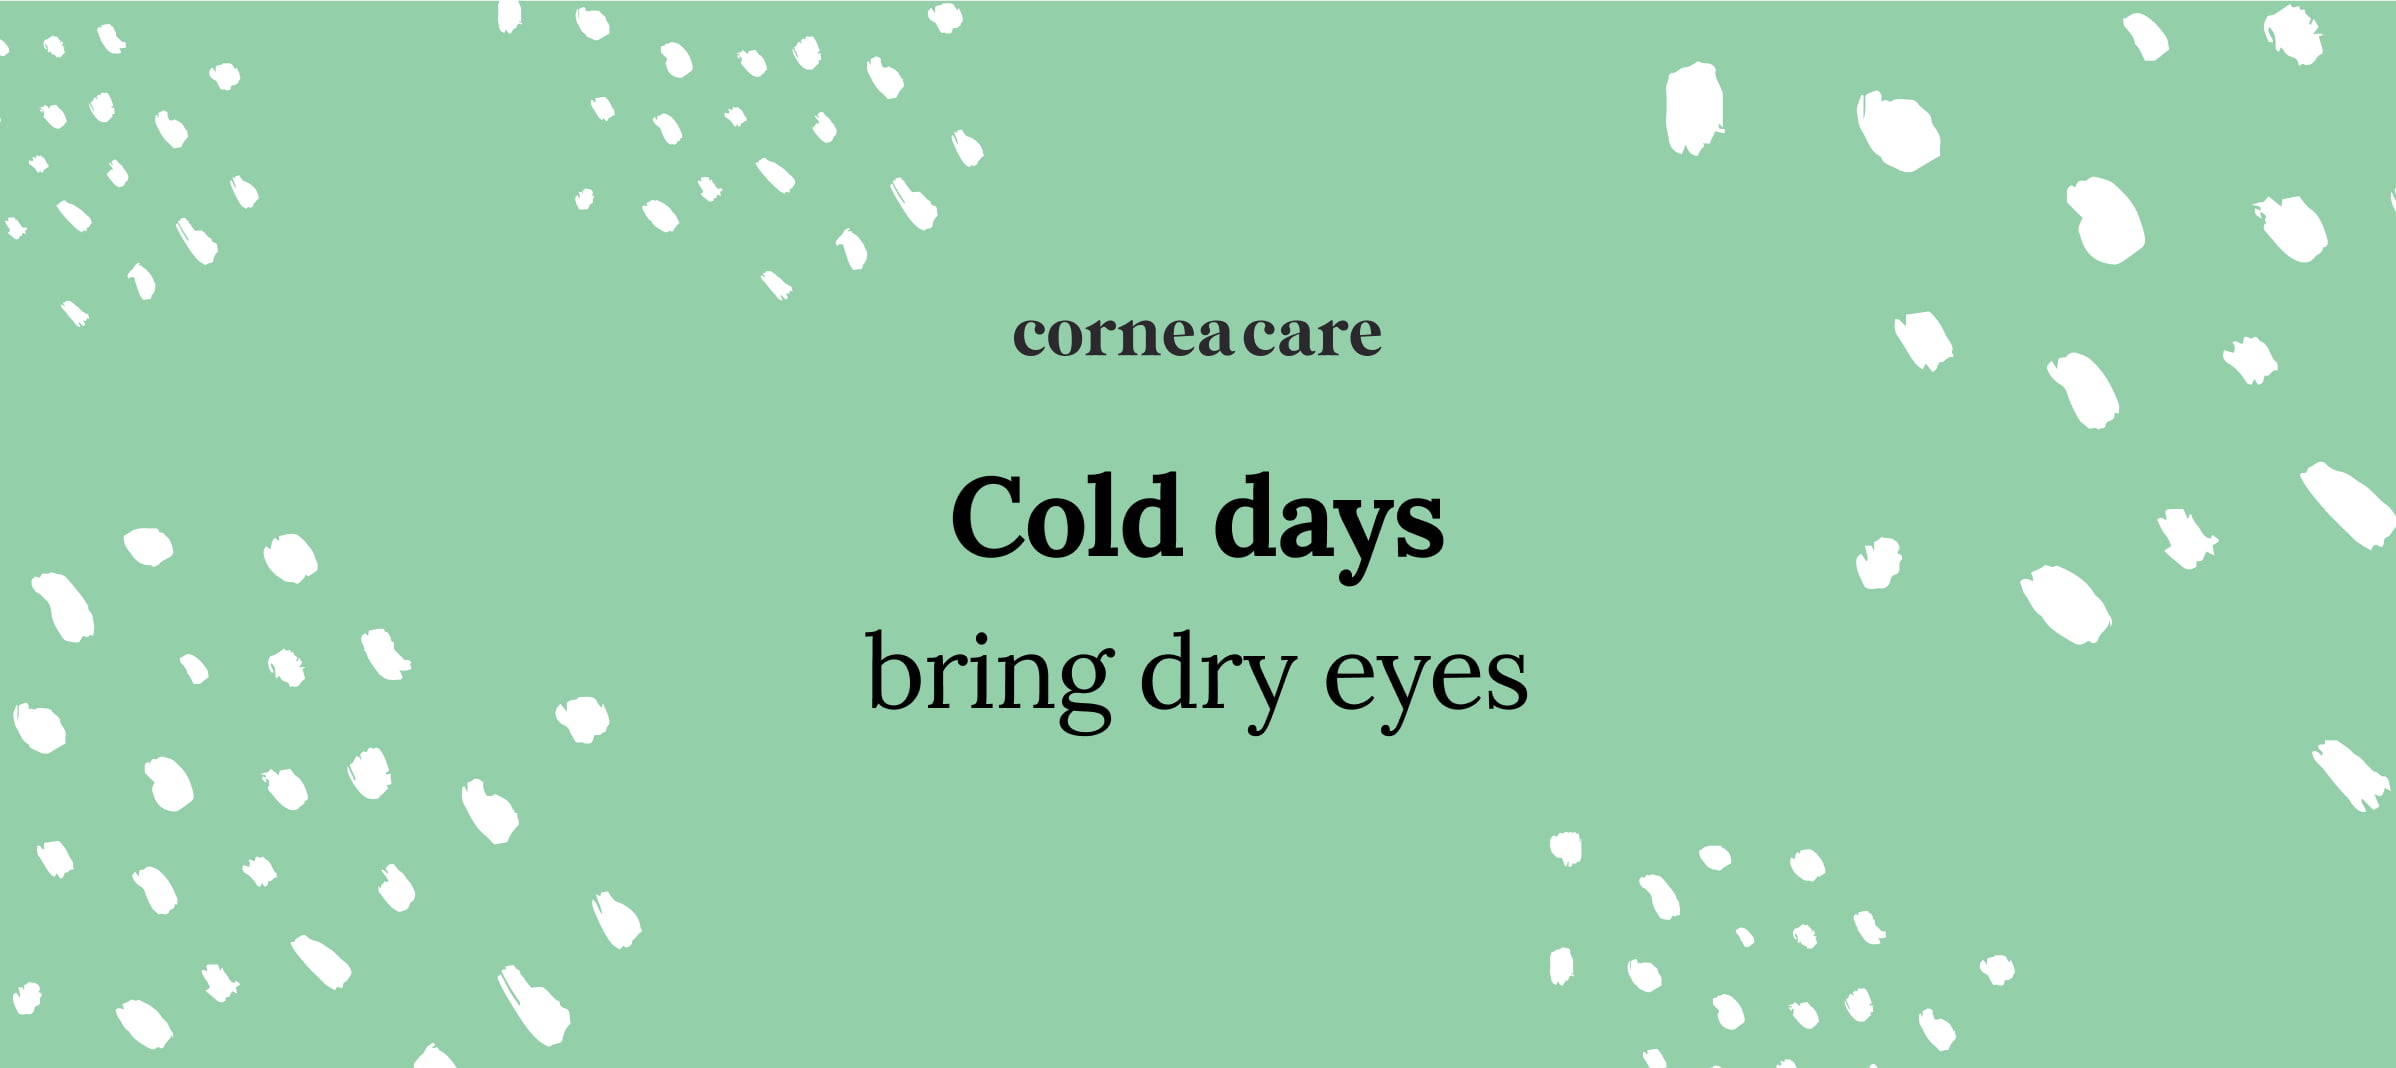 How to manage dry eyes in the winter